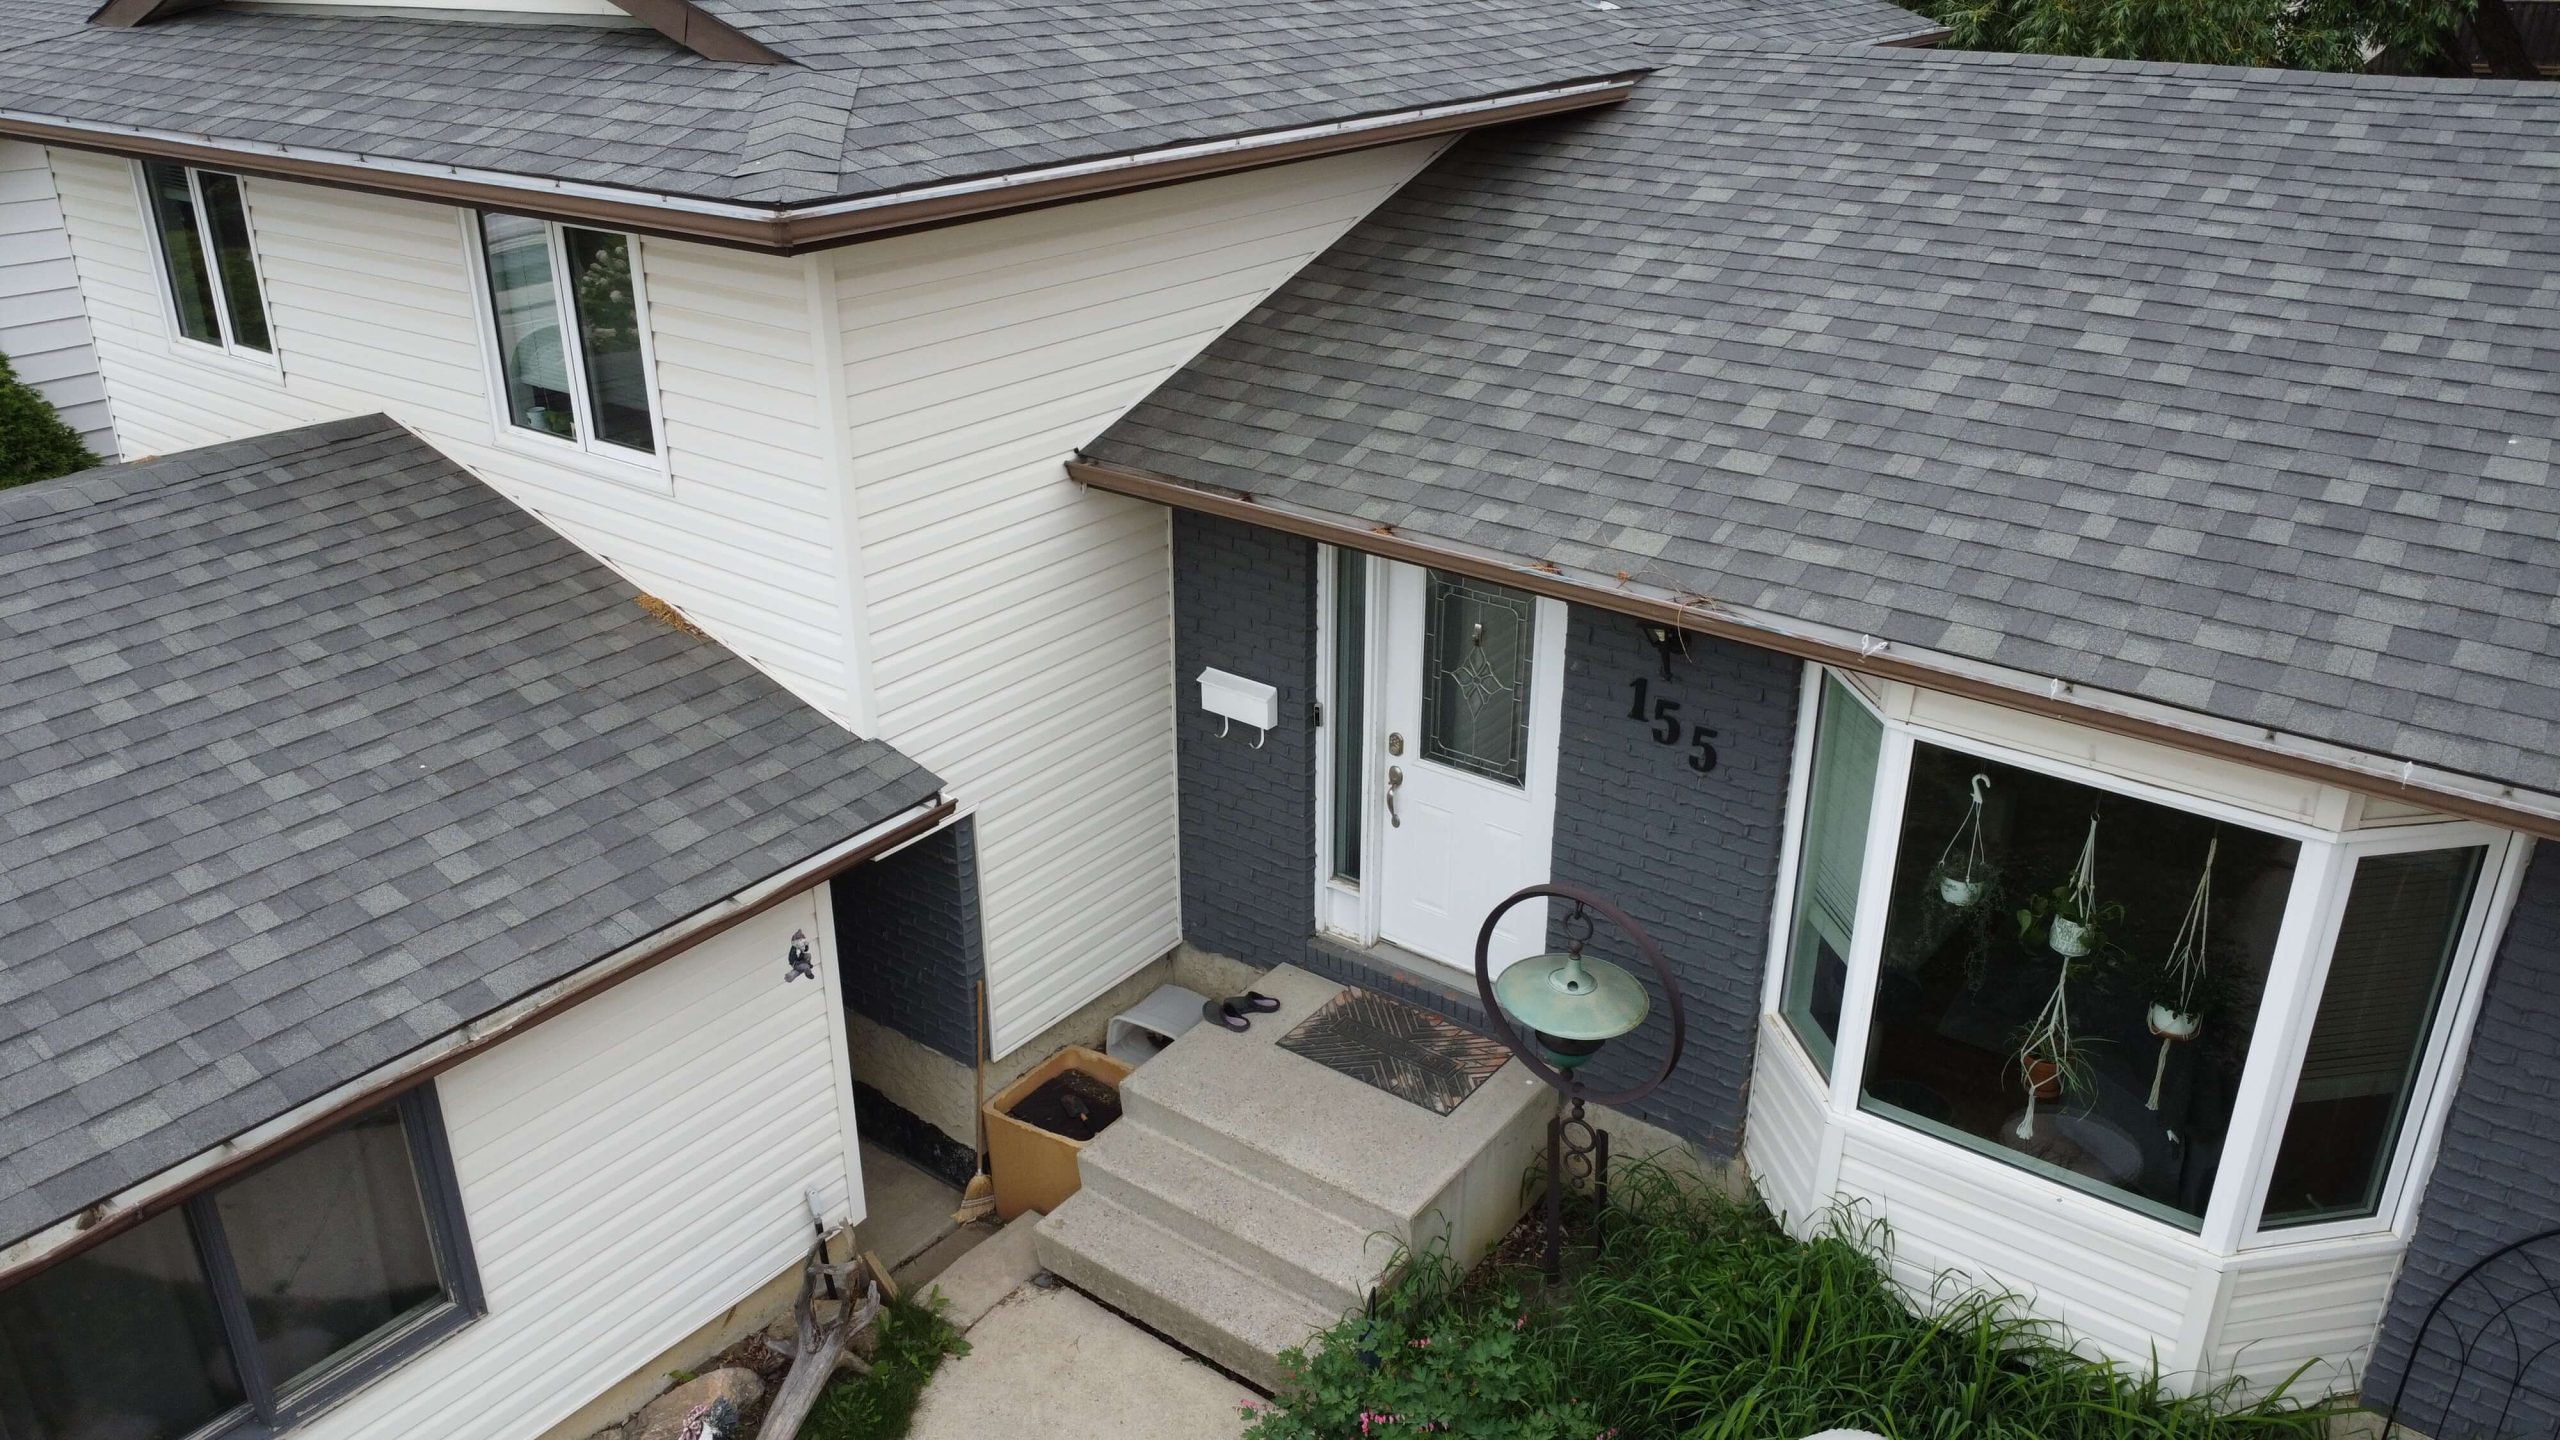 Calgary Area Home Inspections